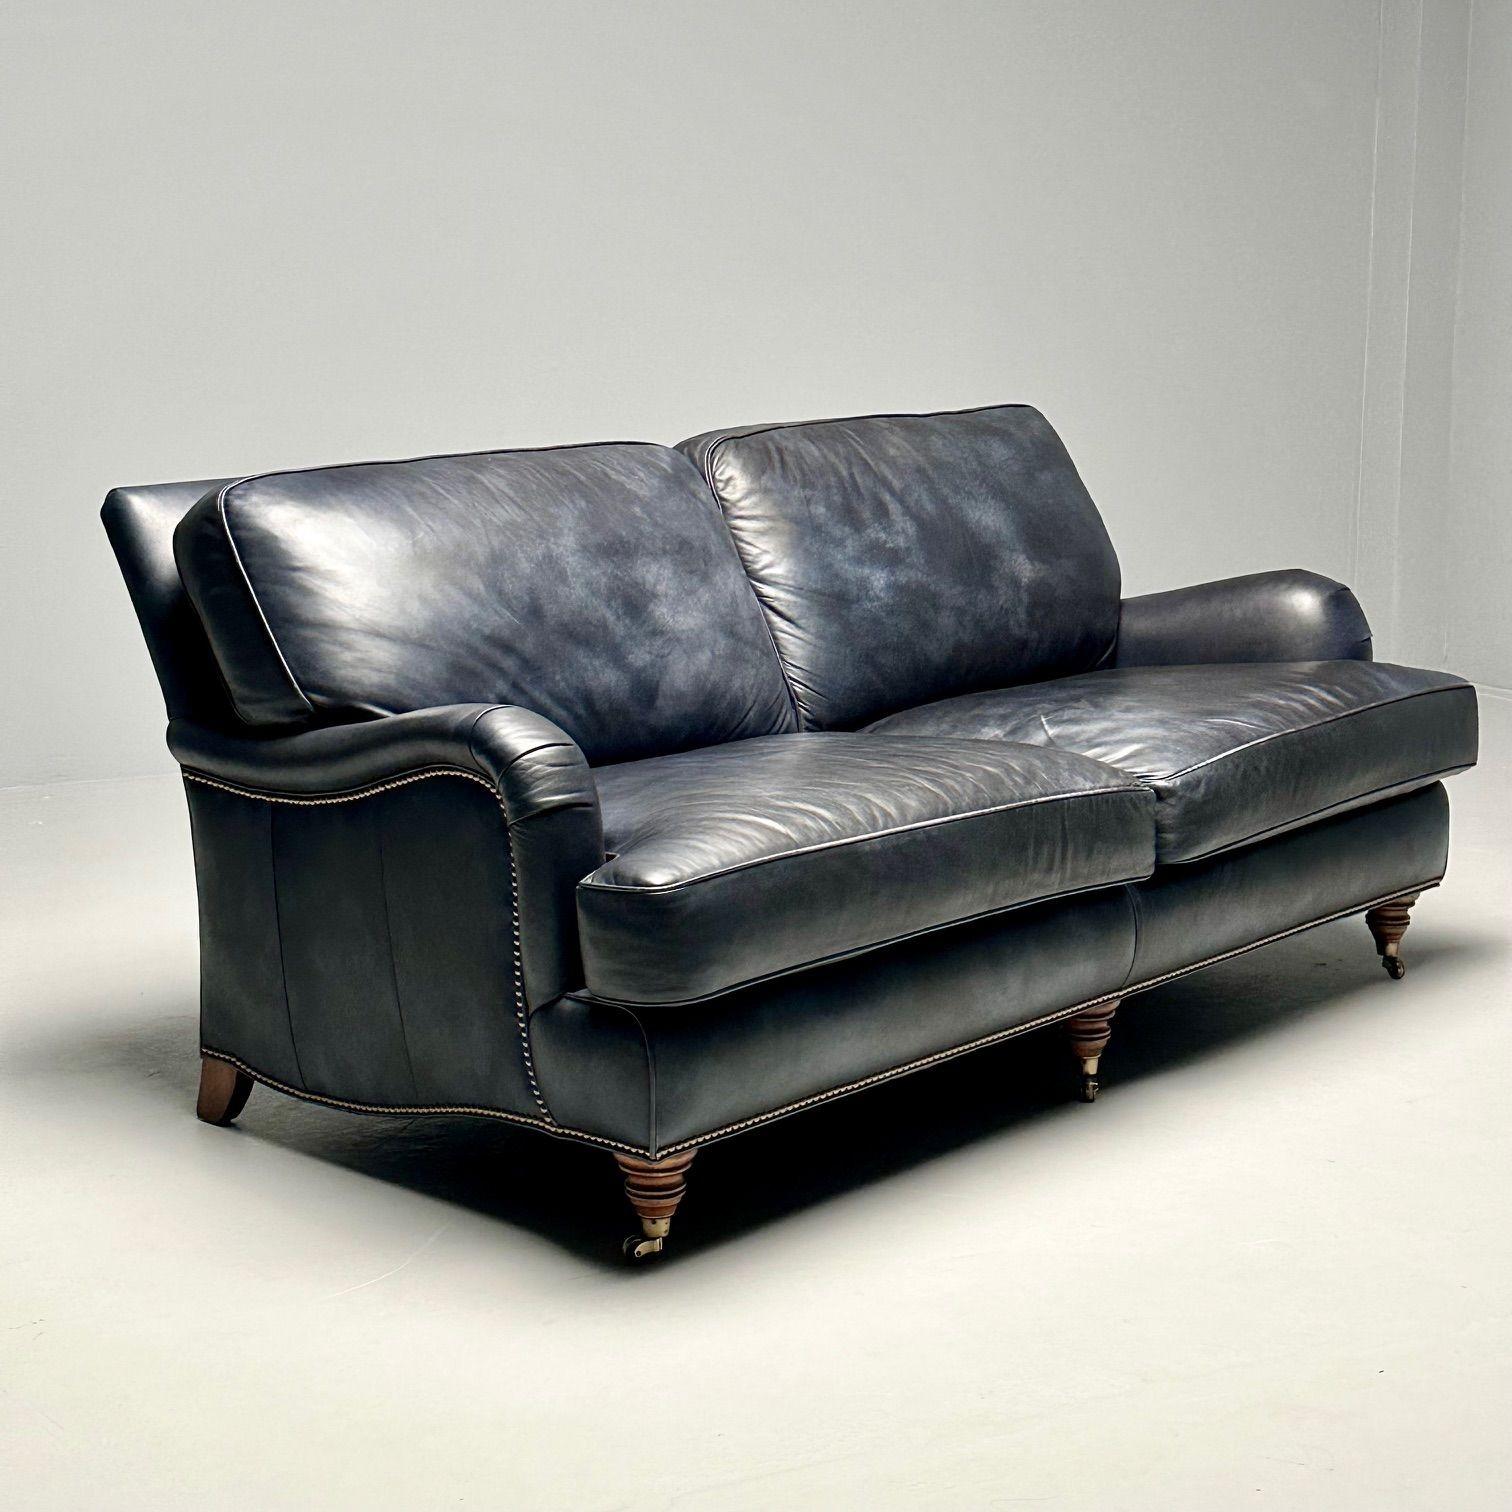 Contemporary Hancock and Moore, Georgian Scroll Arm Sofa, Dark Blue Distressed Leather, 2000s For Sale